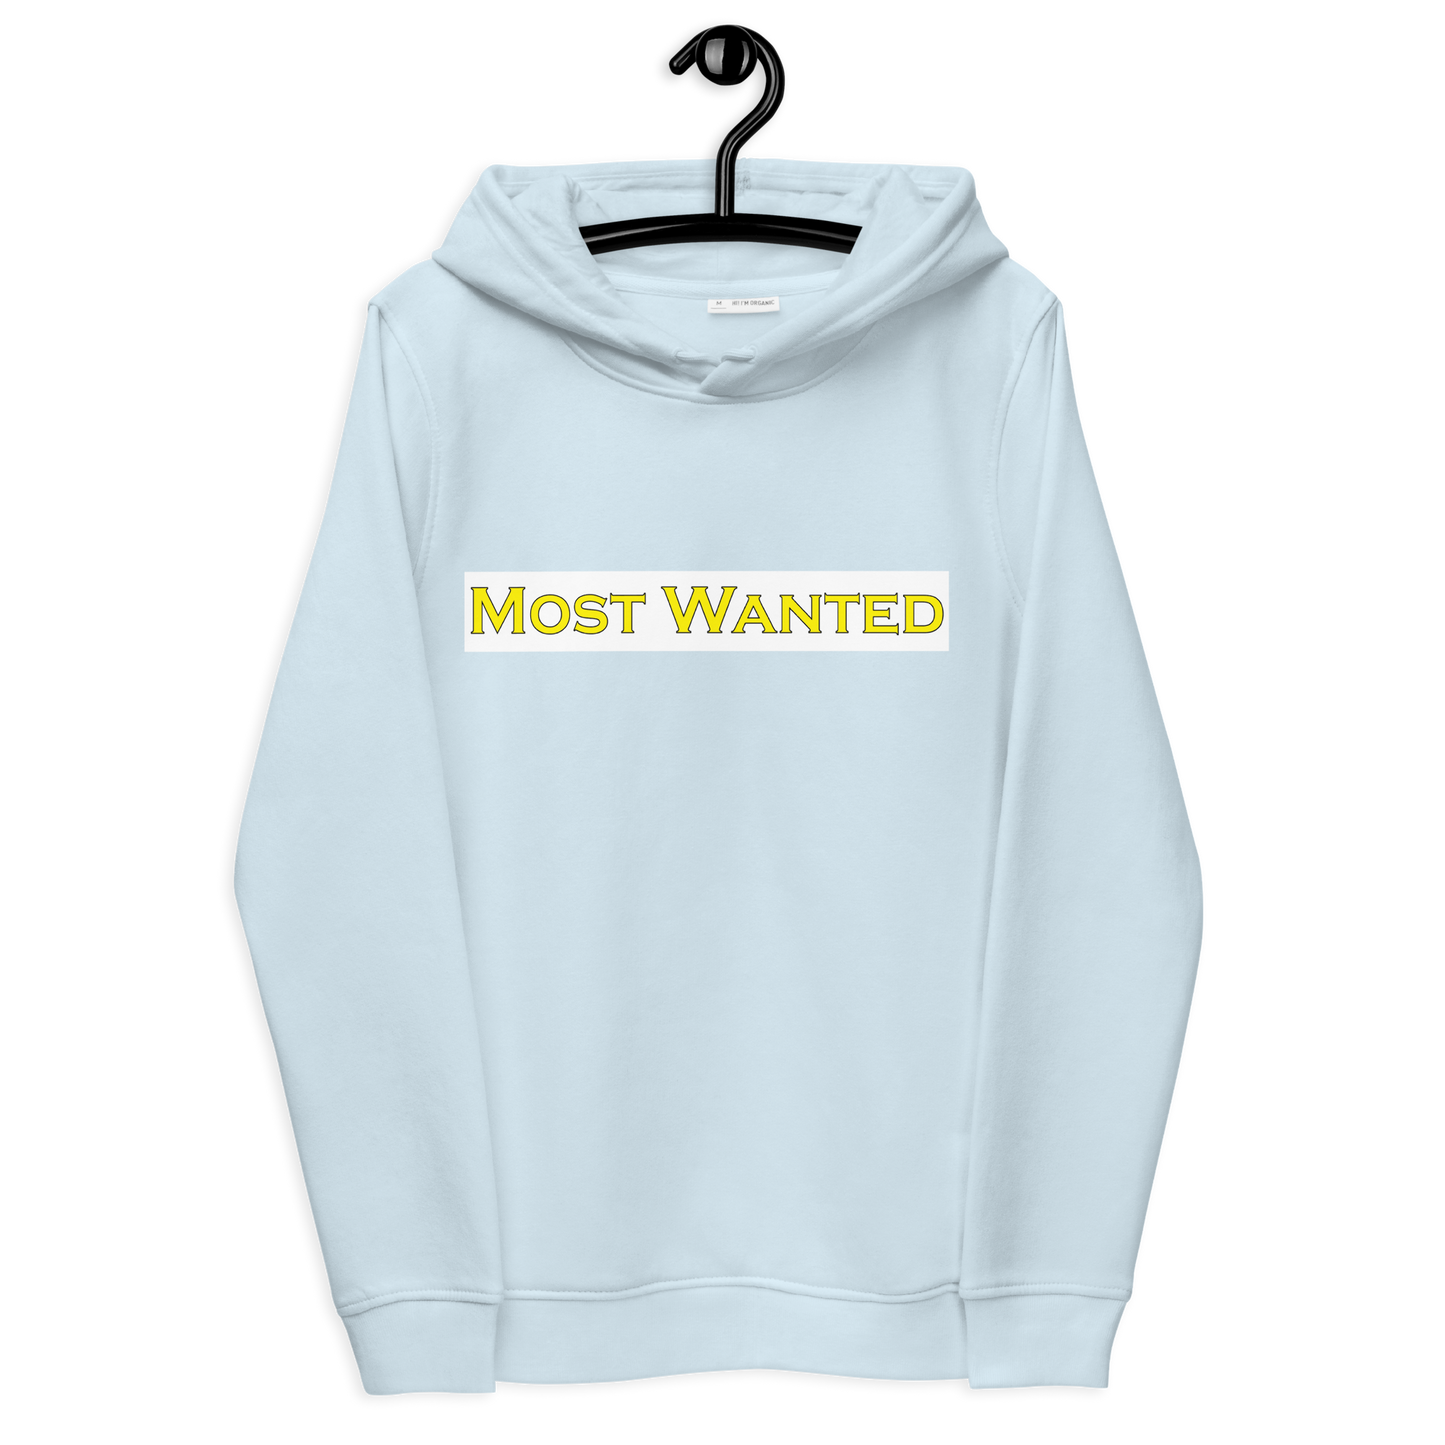 Most Wanted- Say less (Women's)